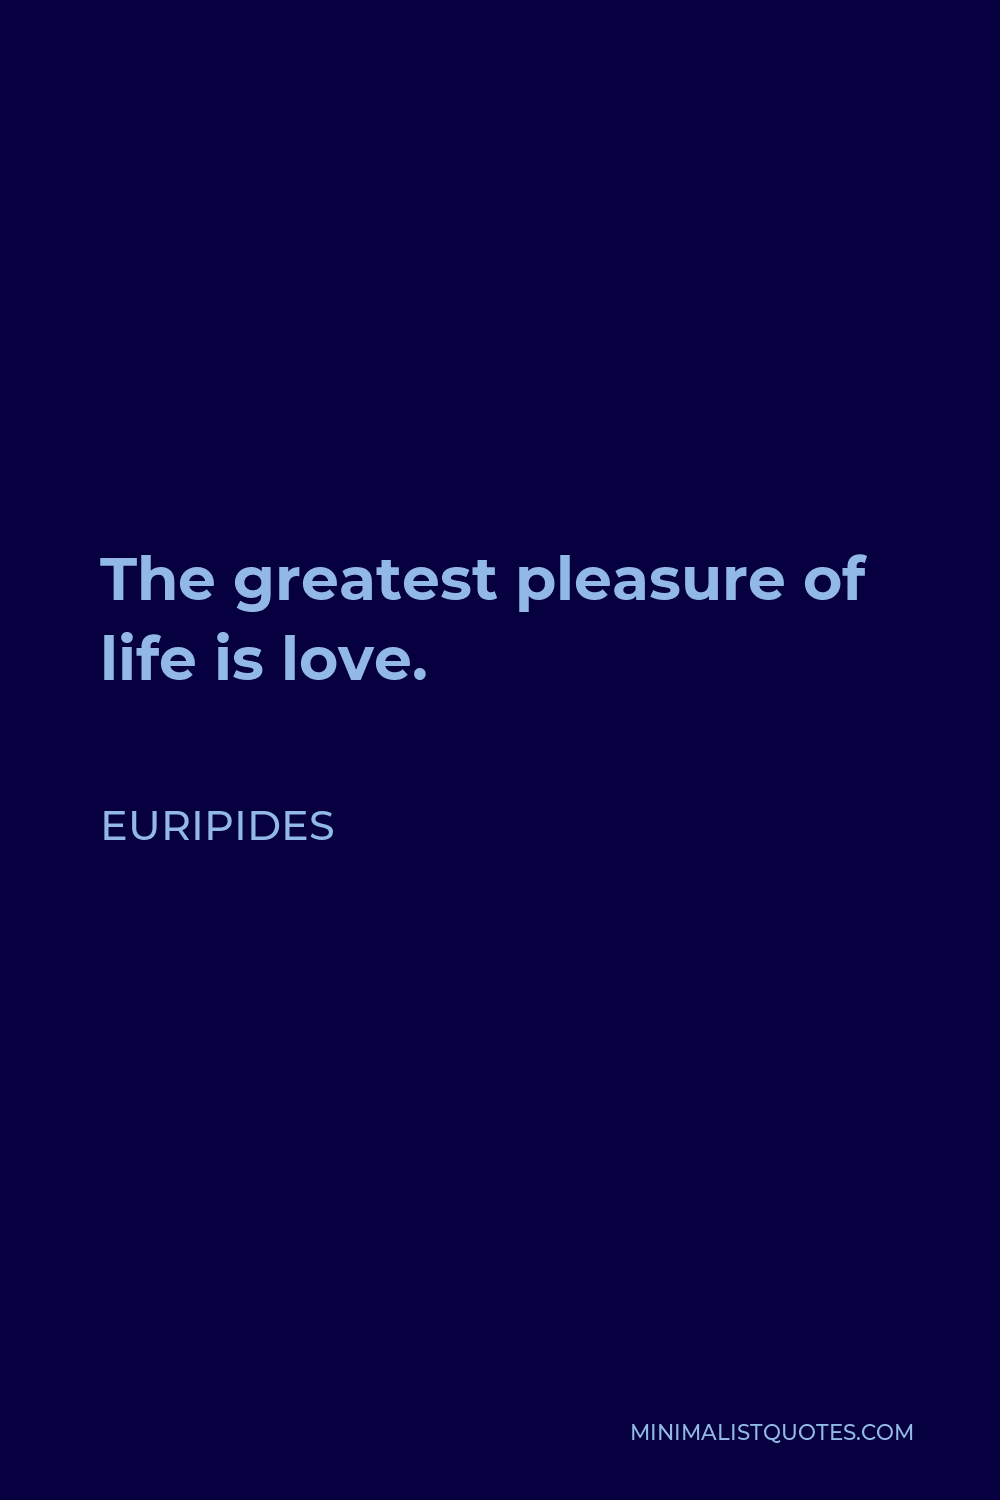 Euripides Quote - The greatest pleasure of life is love.